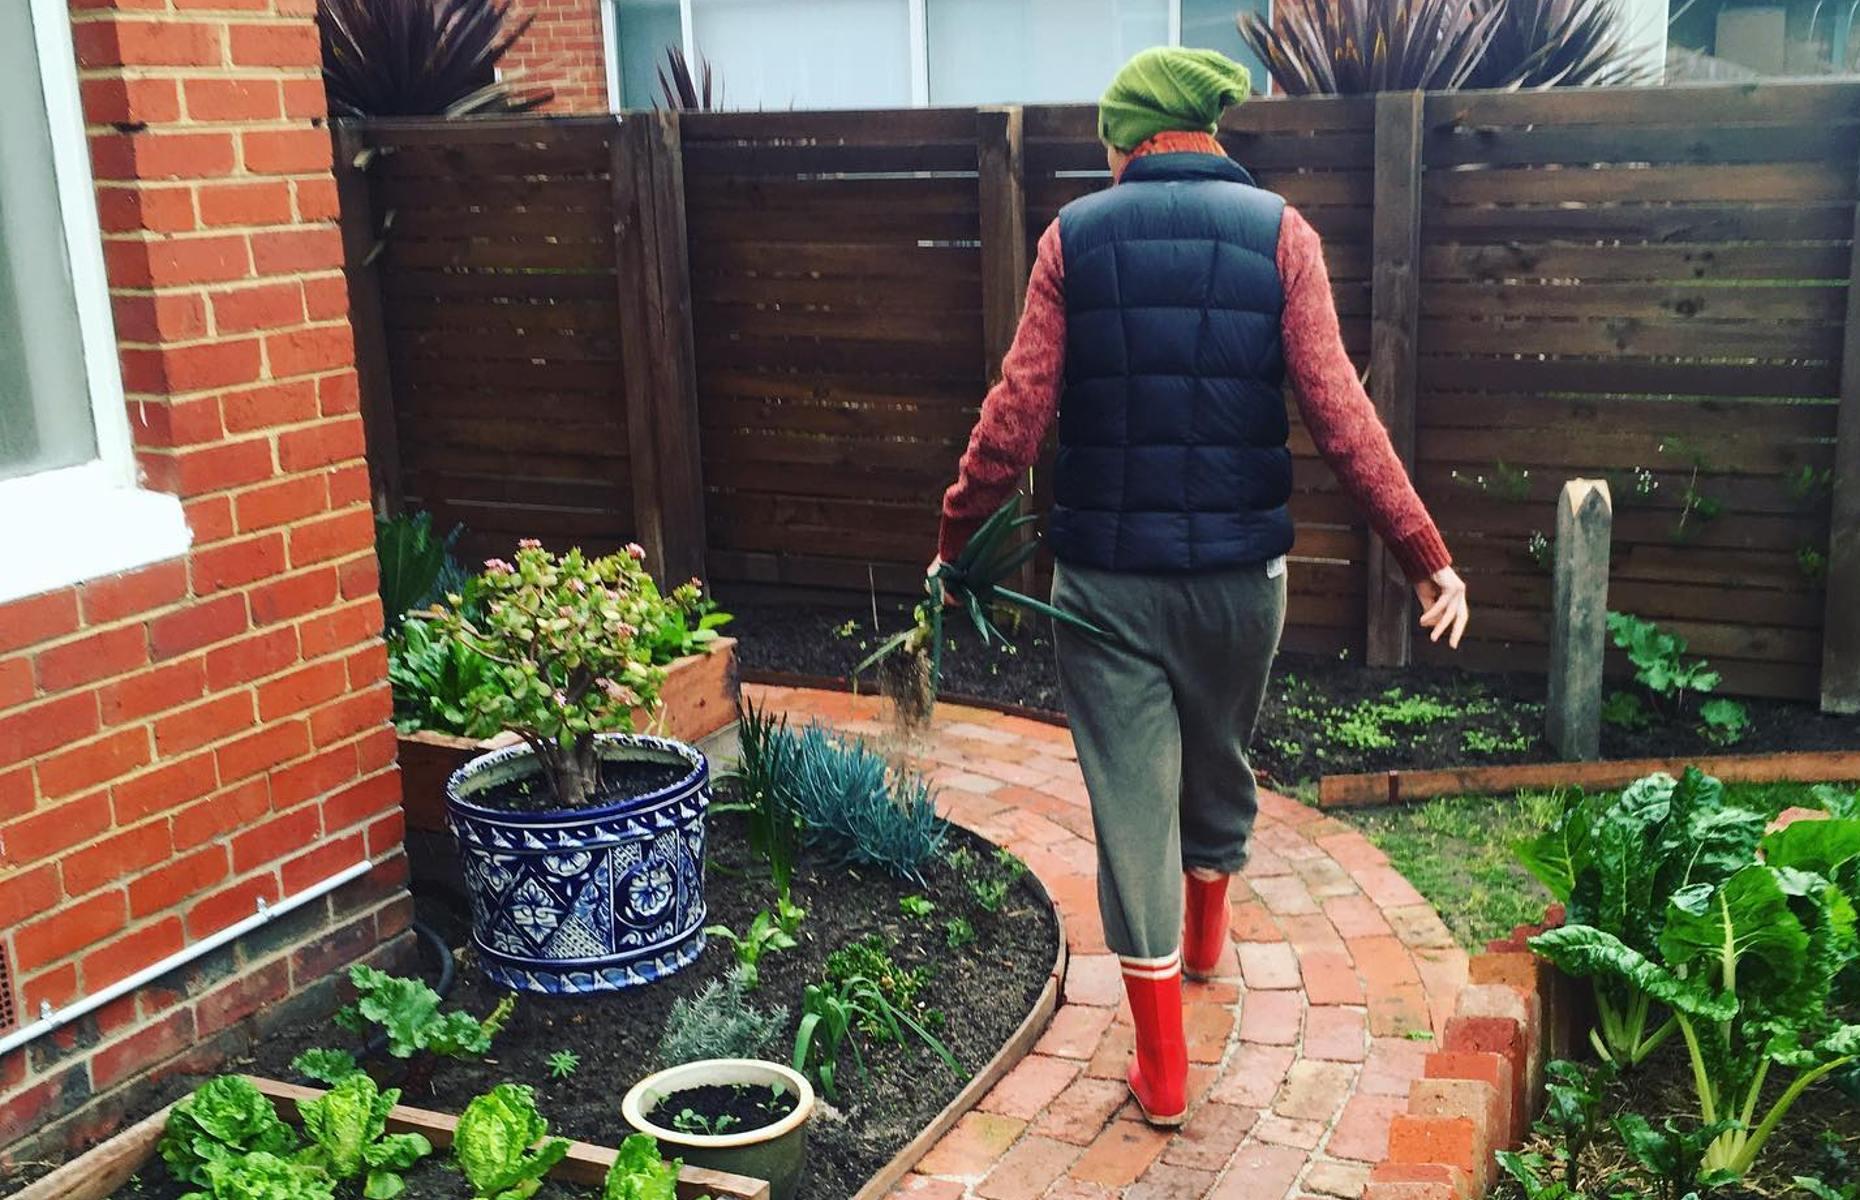 <p>Your garden will need regular attention so ideally position it close to the house for easy access, like the folk at <a href="https://www.instagram.com/suburban.existence/">Suburban Existence</a>, where it won’t be ‘out of sight and out of mind’. Try to site it close to a water tap too or place some barrels nearby where water can be collected to make the task easy.</p>